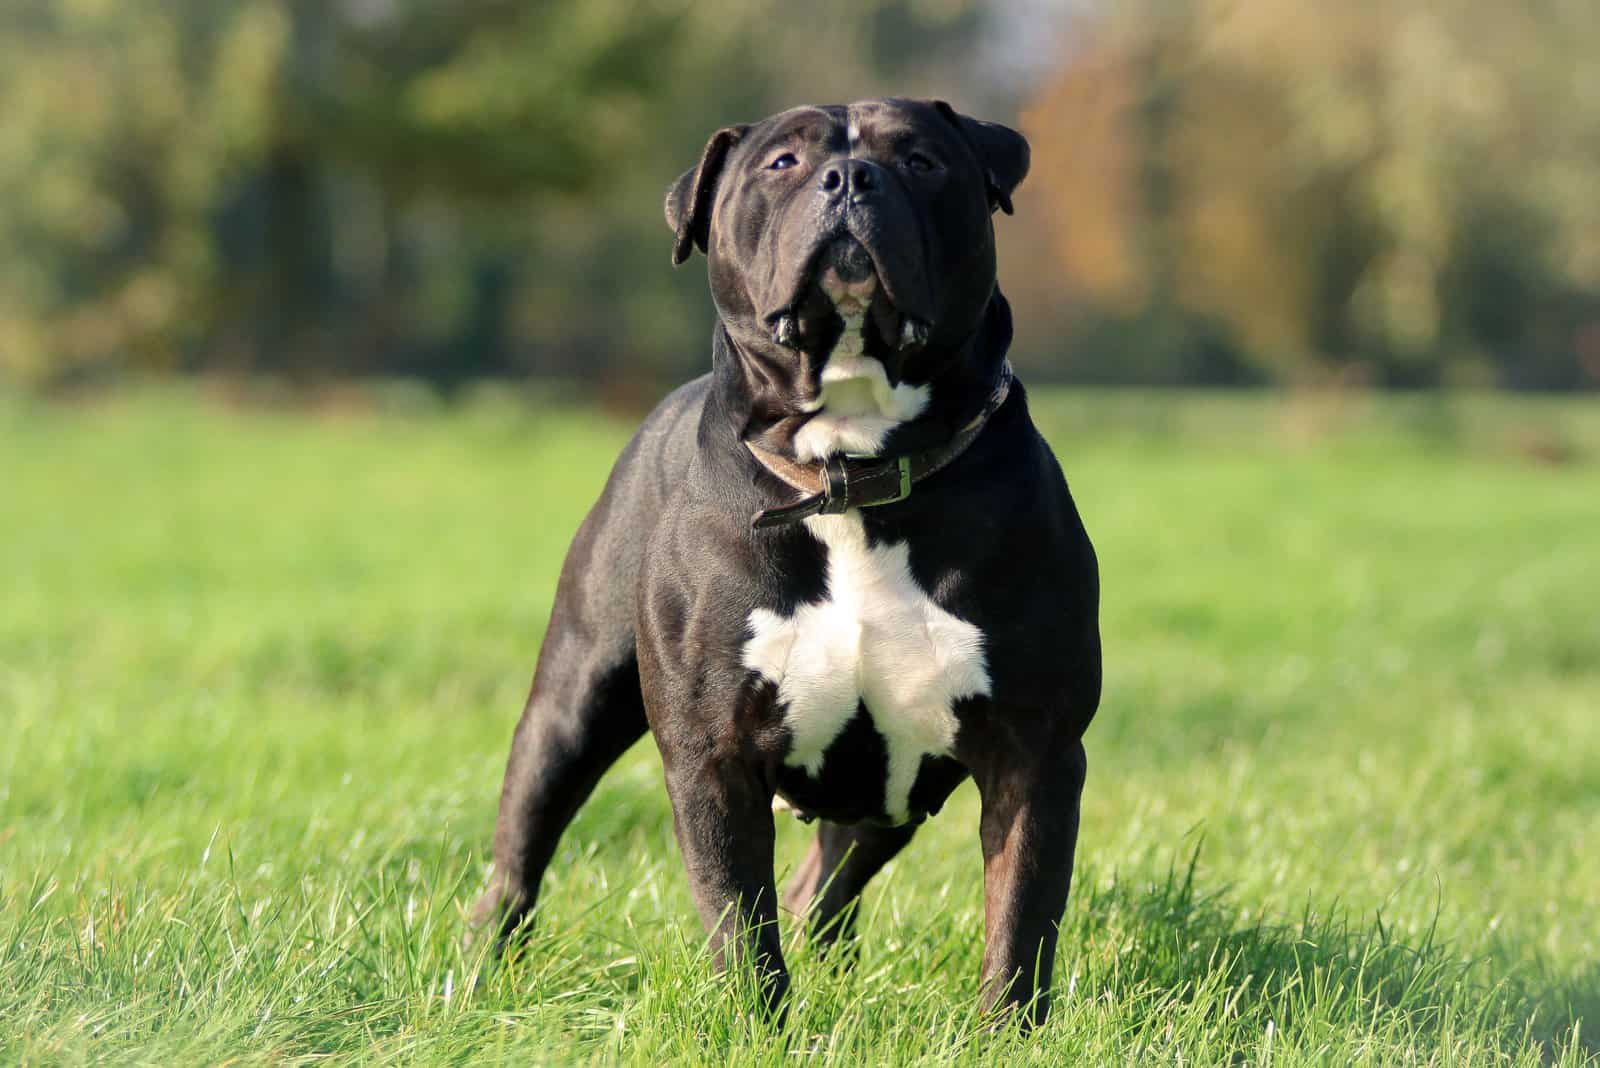 The American Bully stands on the green grass